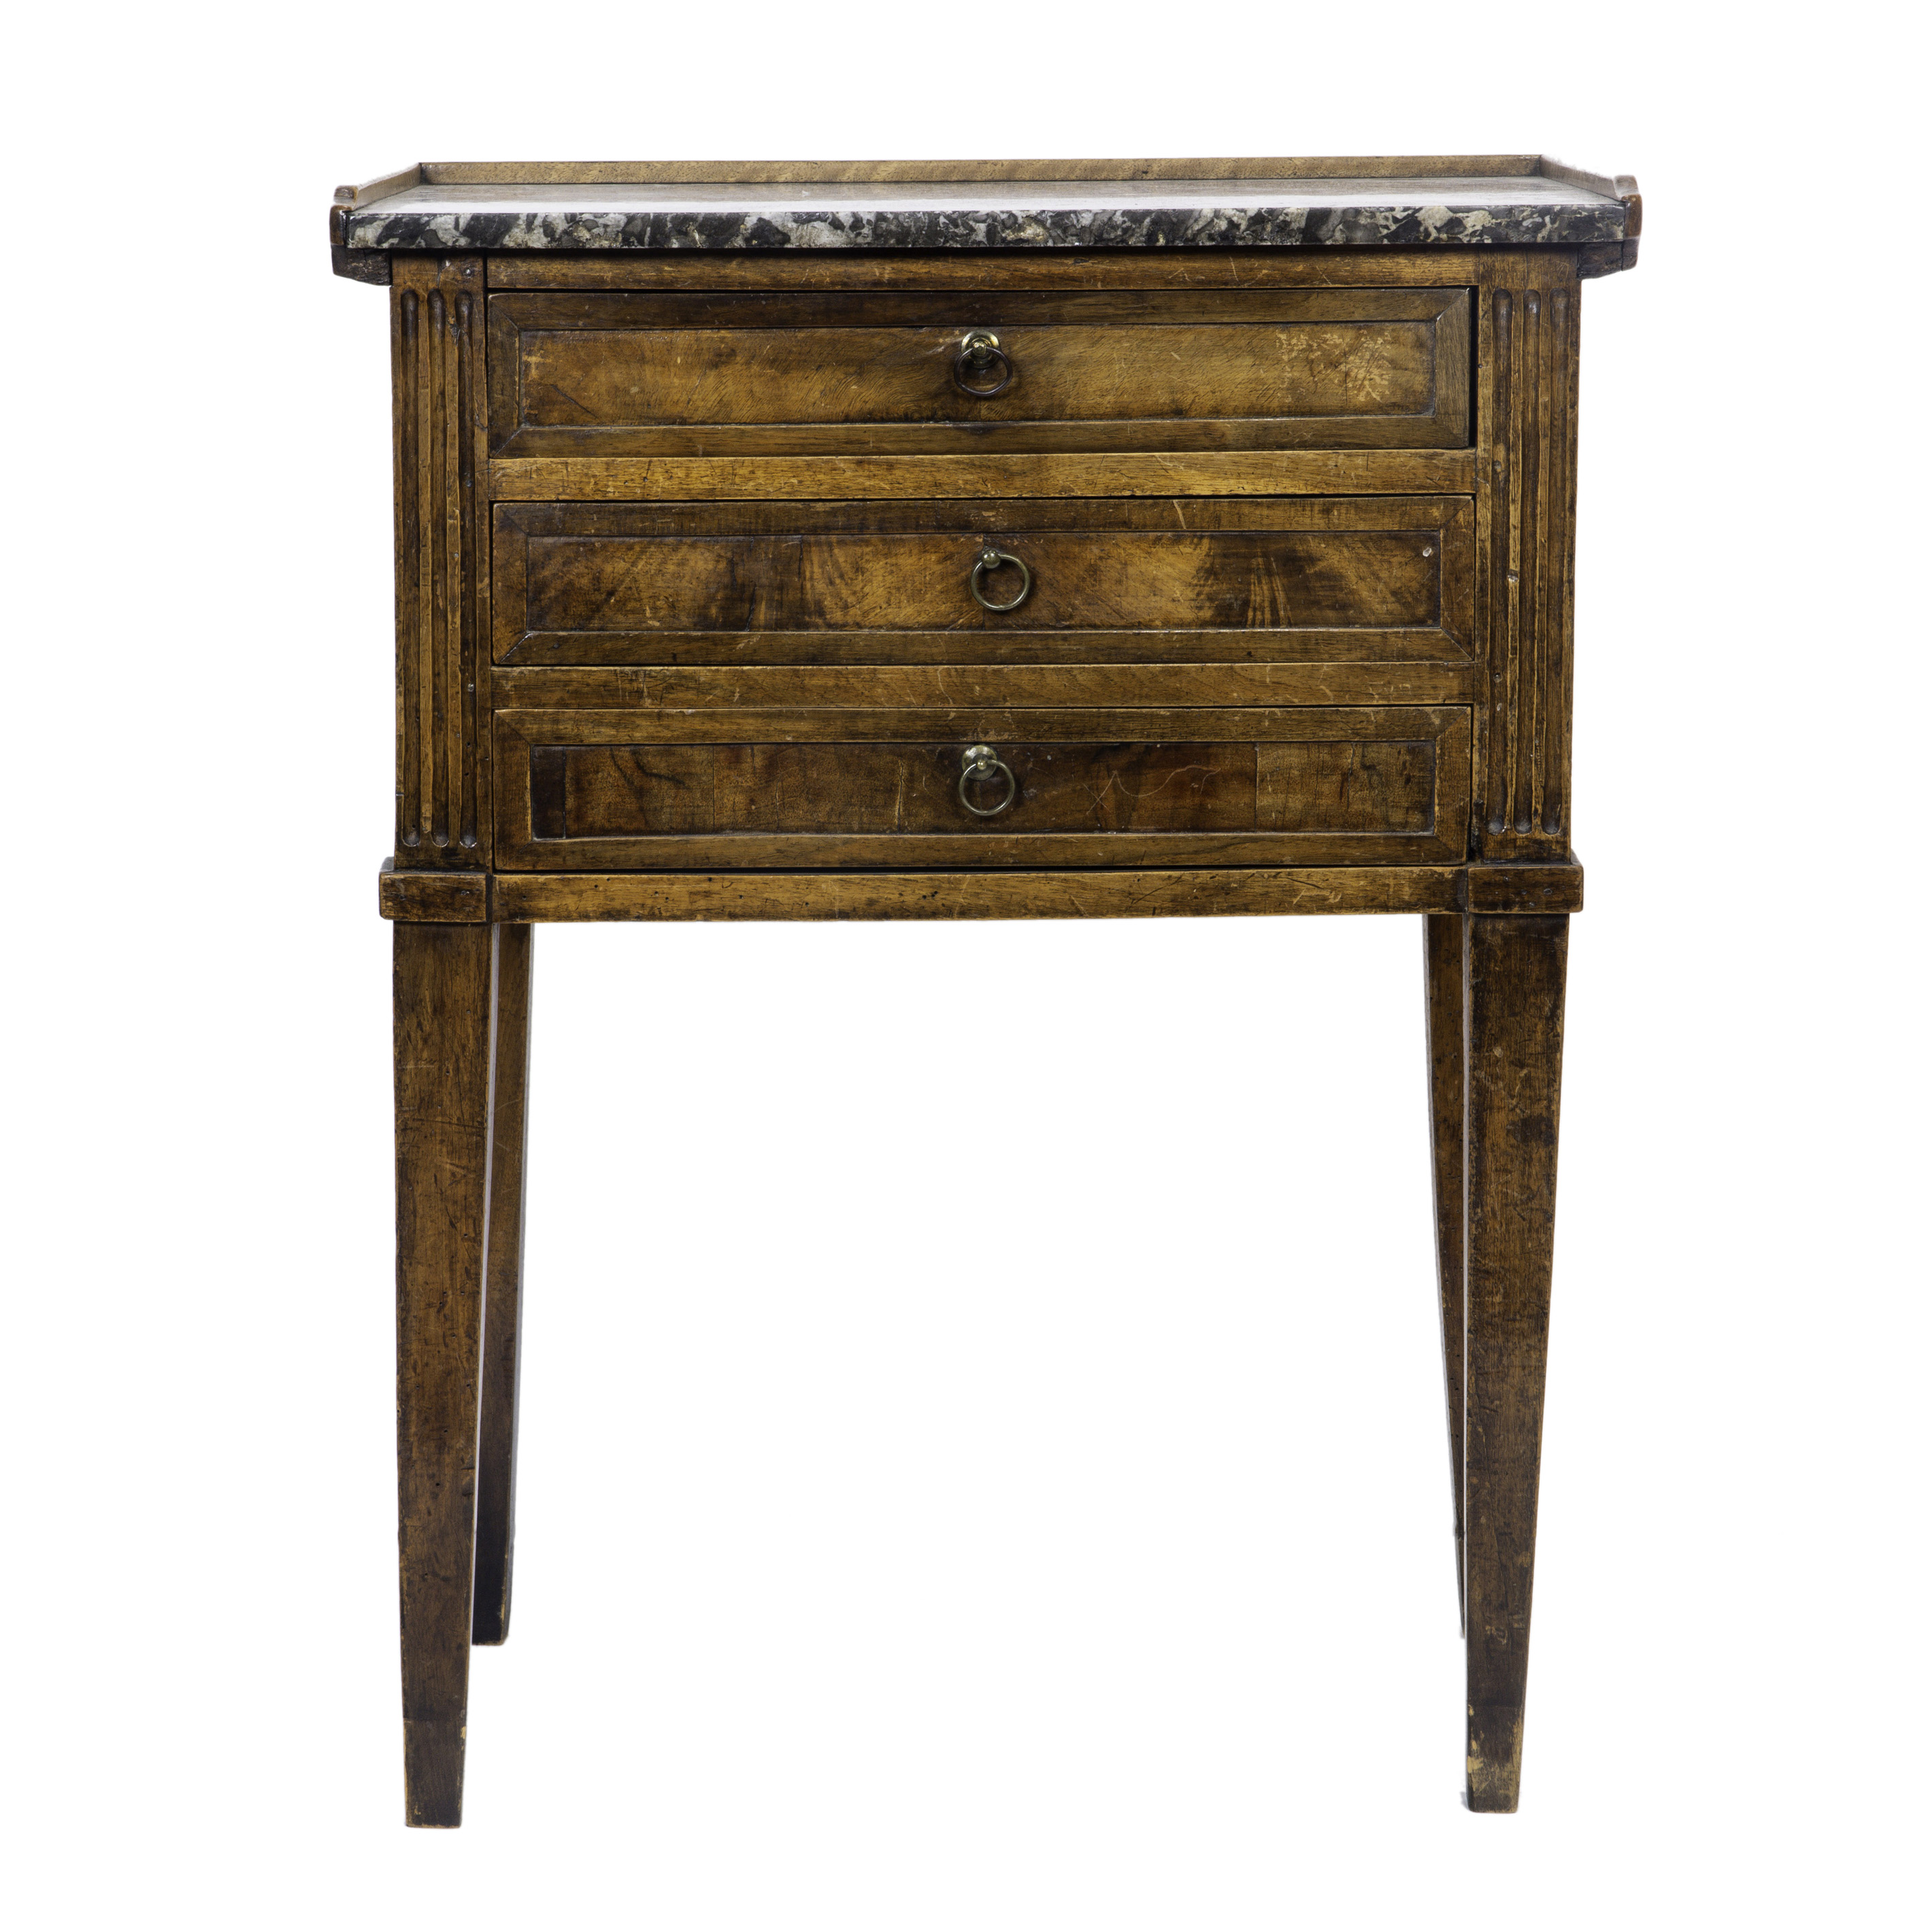 A FRENCH NEOCLASSICAL STYLE PETITE